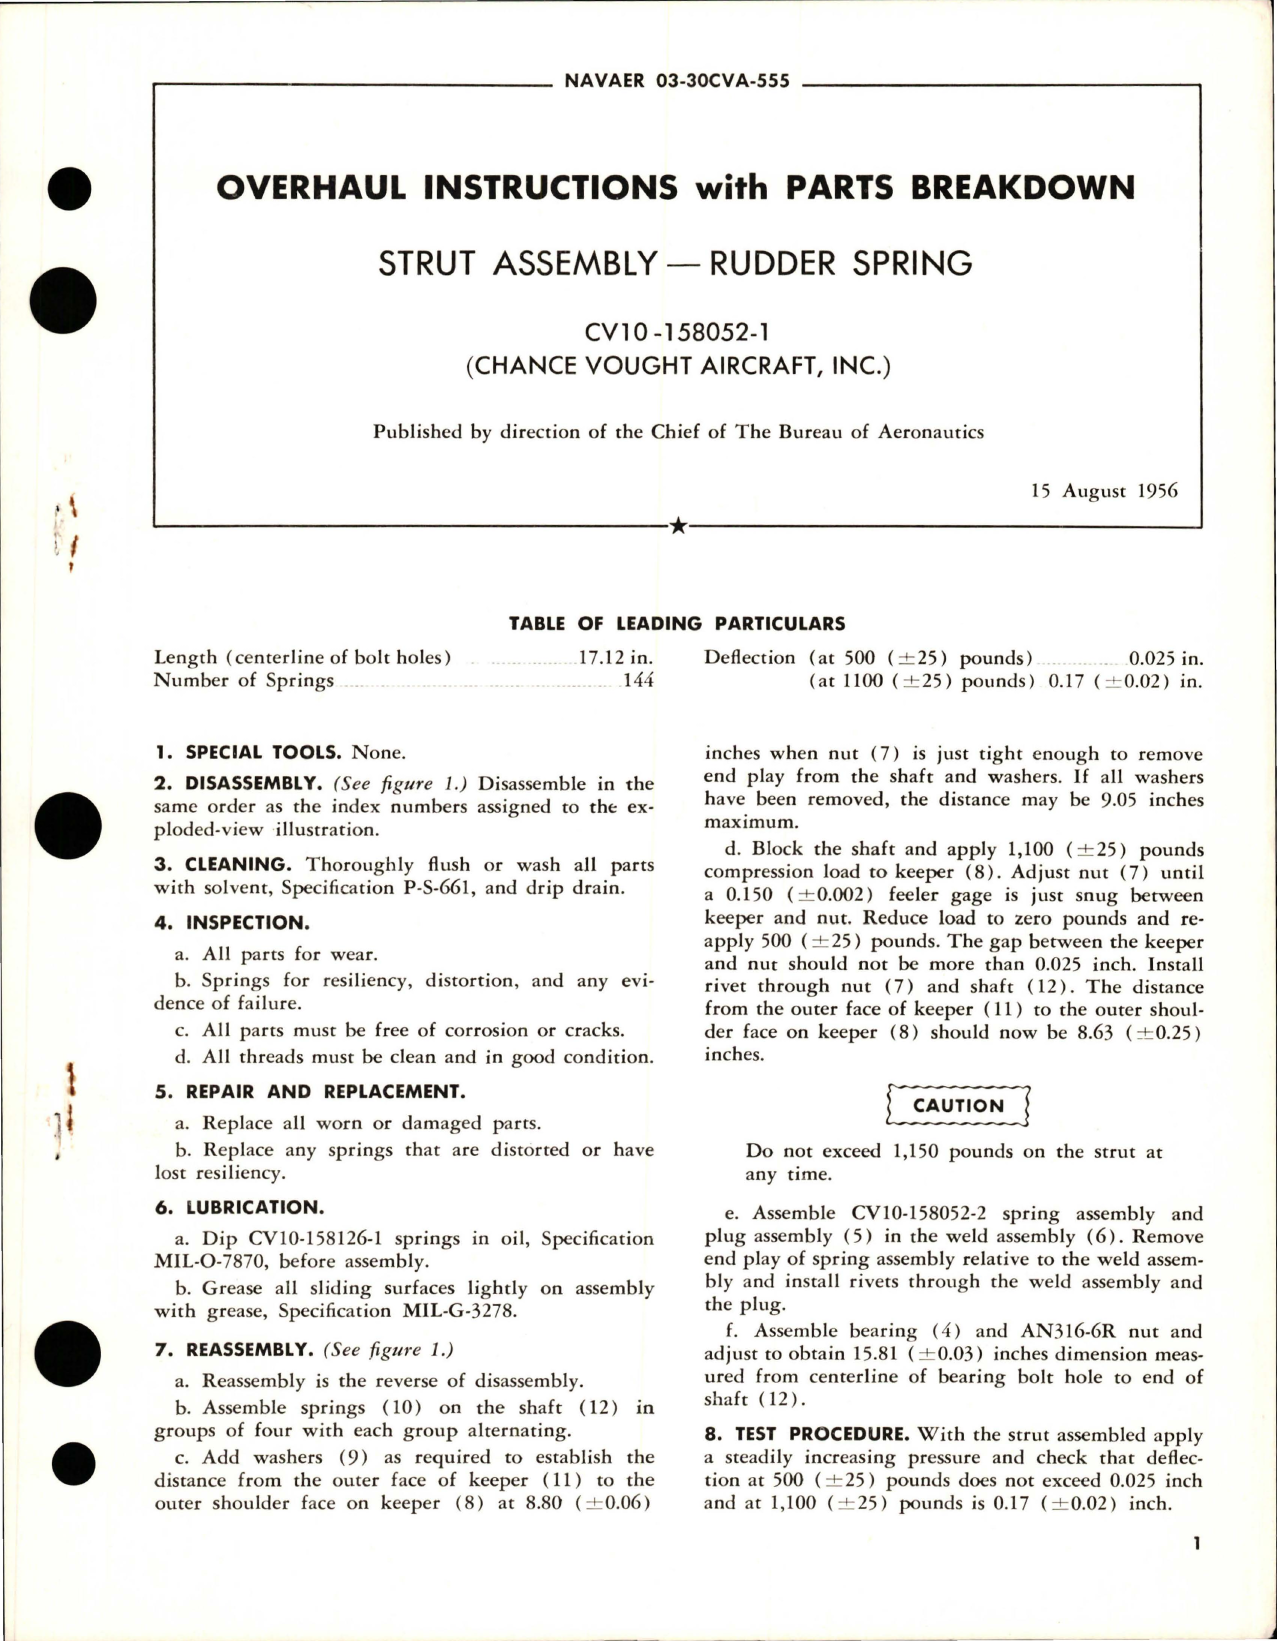 Sample page 1 from AirCorps Library document: Overhaul Instructions with Parts Breakdown for Rudder Spring Strut Assembly